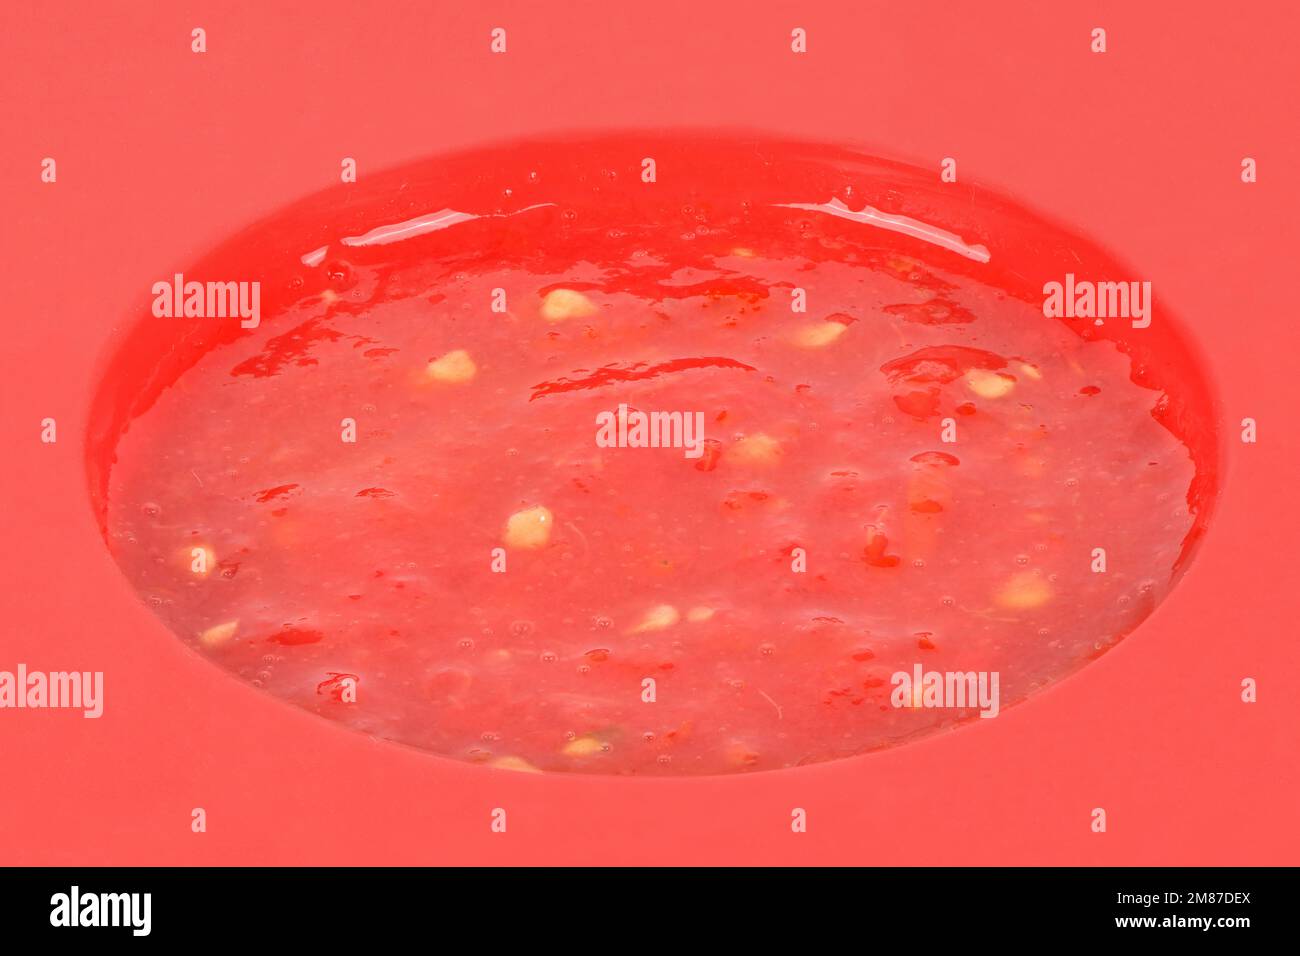 https://c8.alamy.com/comp/2M87DEX/freeze-fruit-smoothie-in-silicone-mold-side-view-high-resolution-photo-full-depth-of-field-2M87DEX.jpg